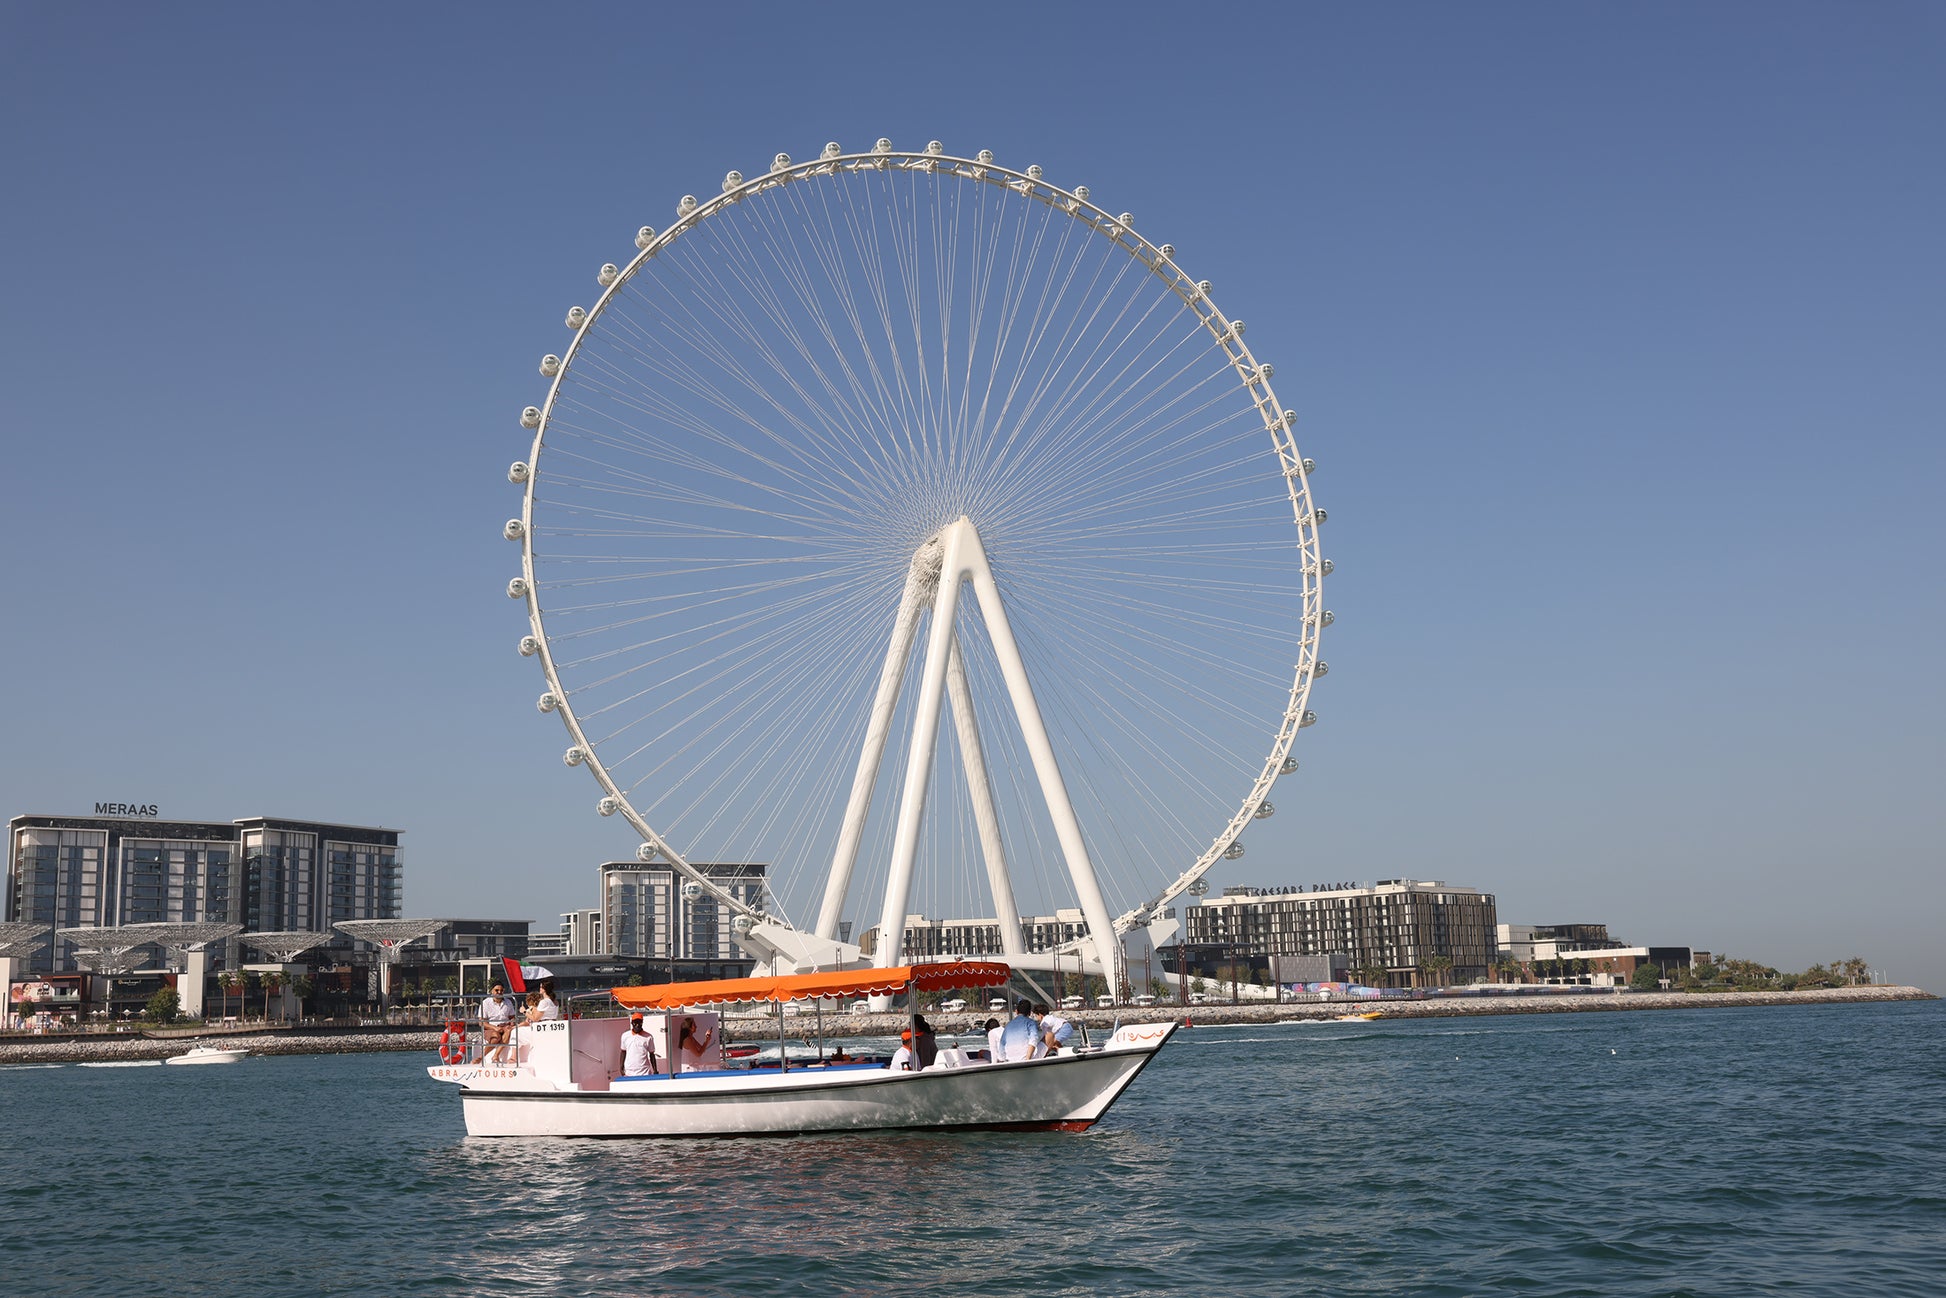 Ferris wheel with boat passing by - Dubai